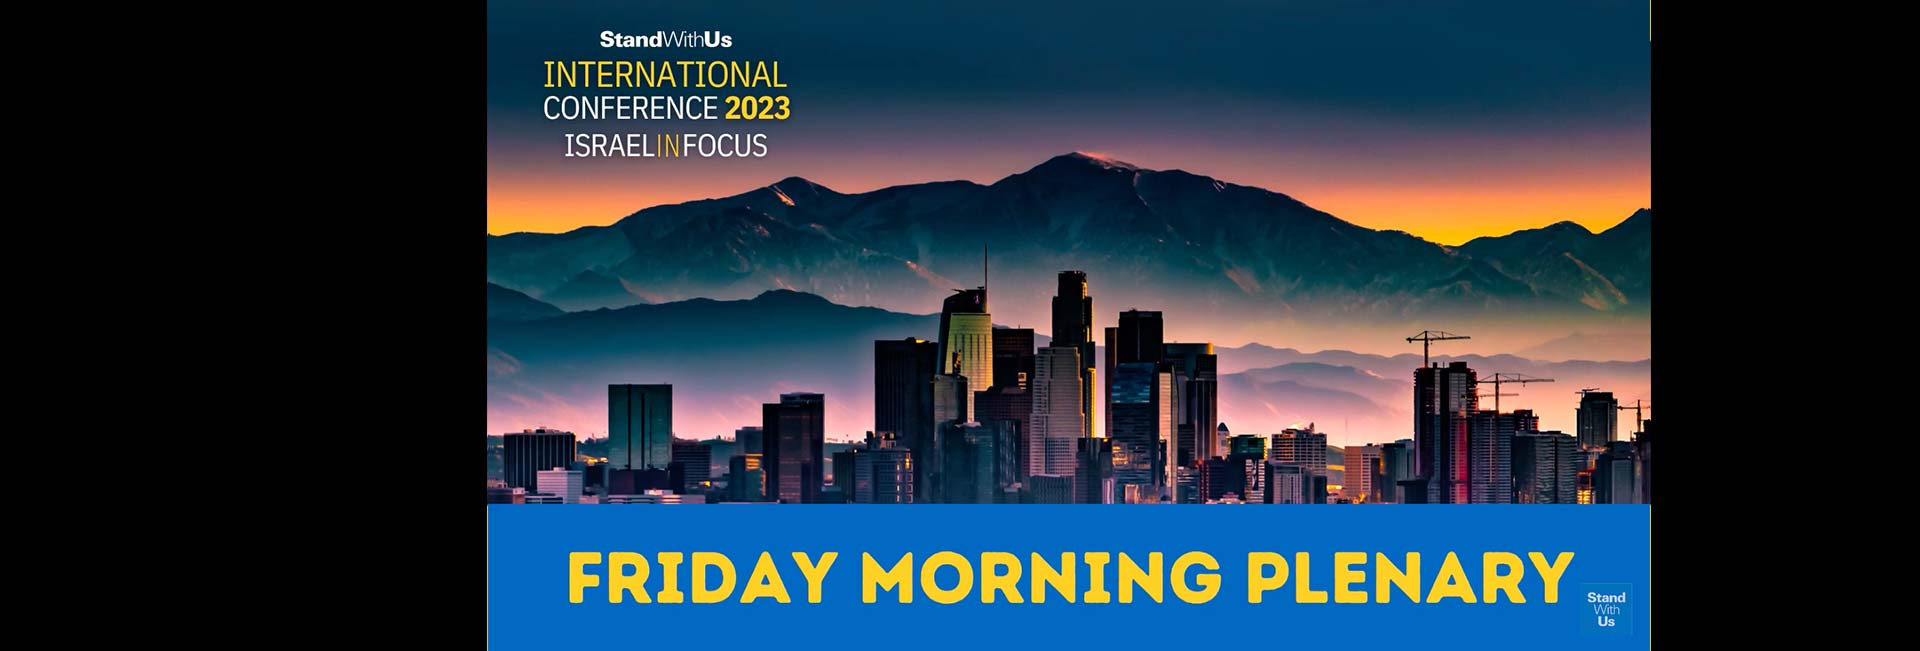 StandWithUs International Conference 2023: Friday Morning Plenary